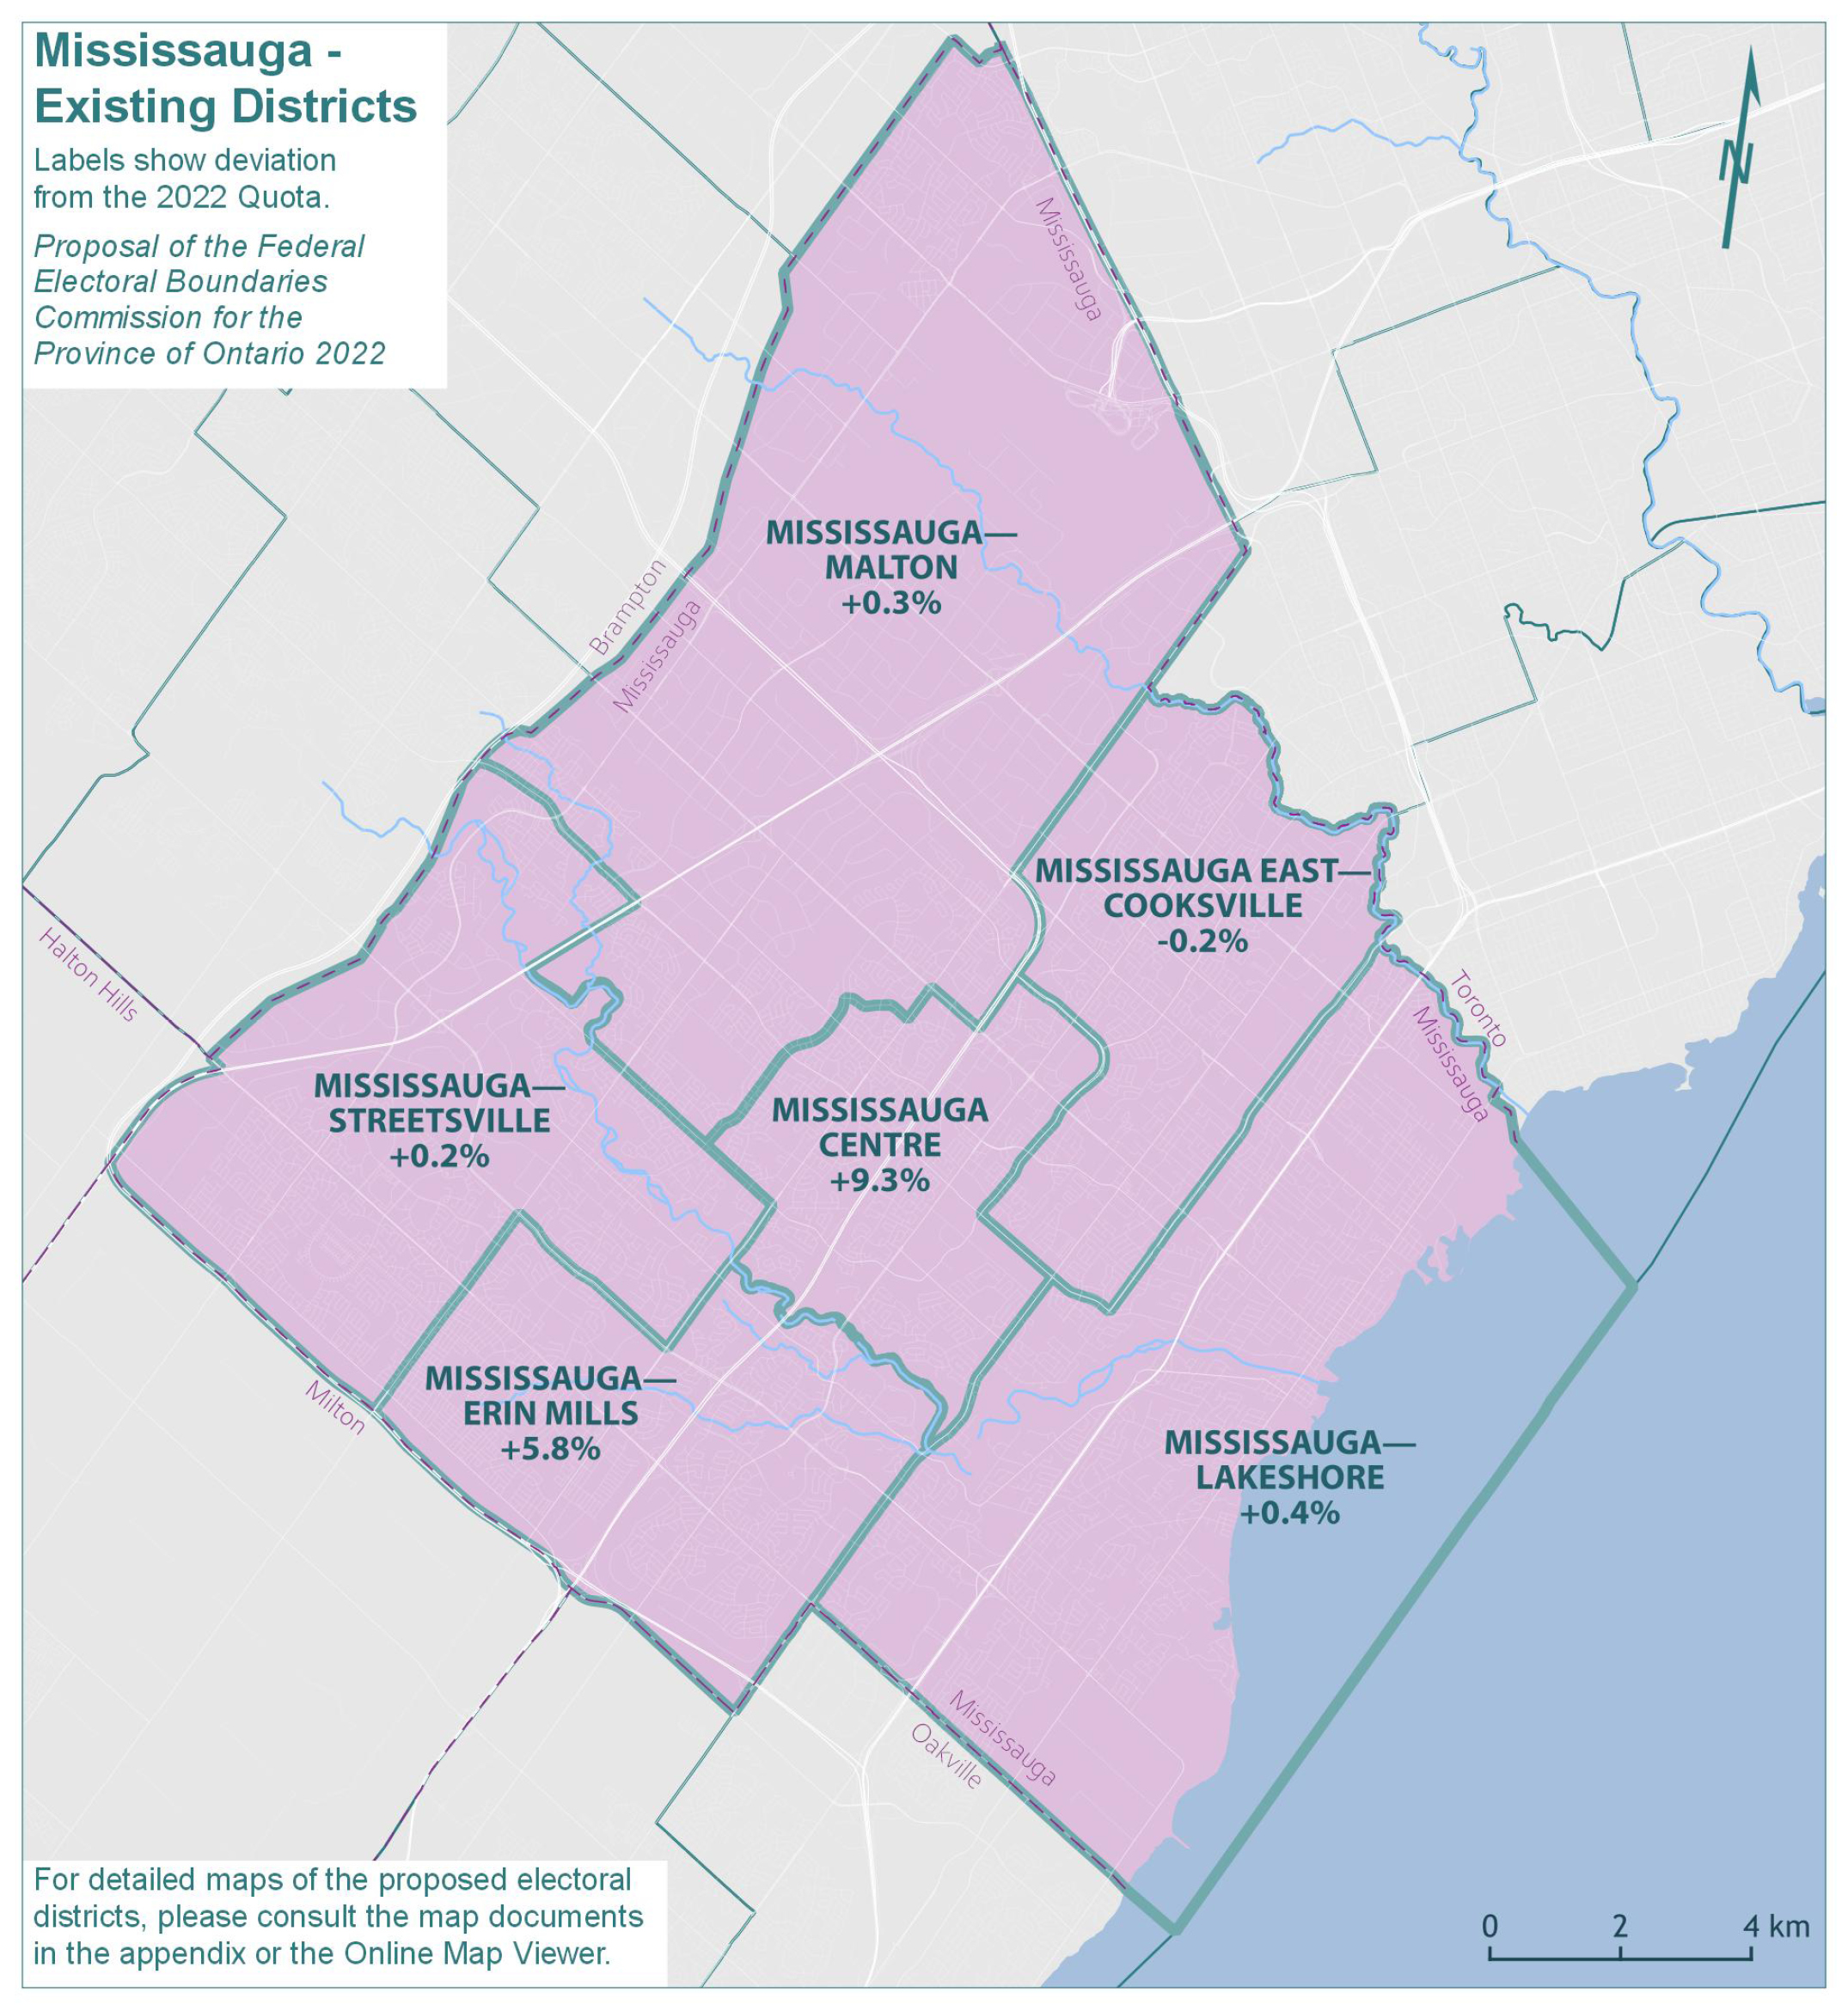 Mississauga - Existing Districts